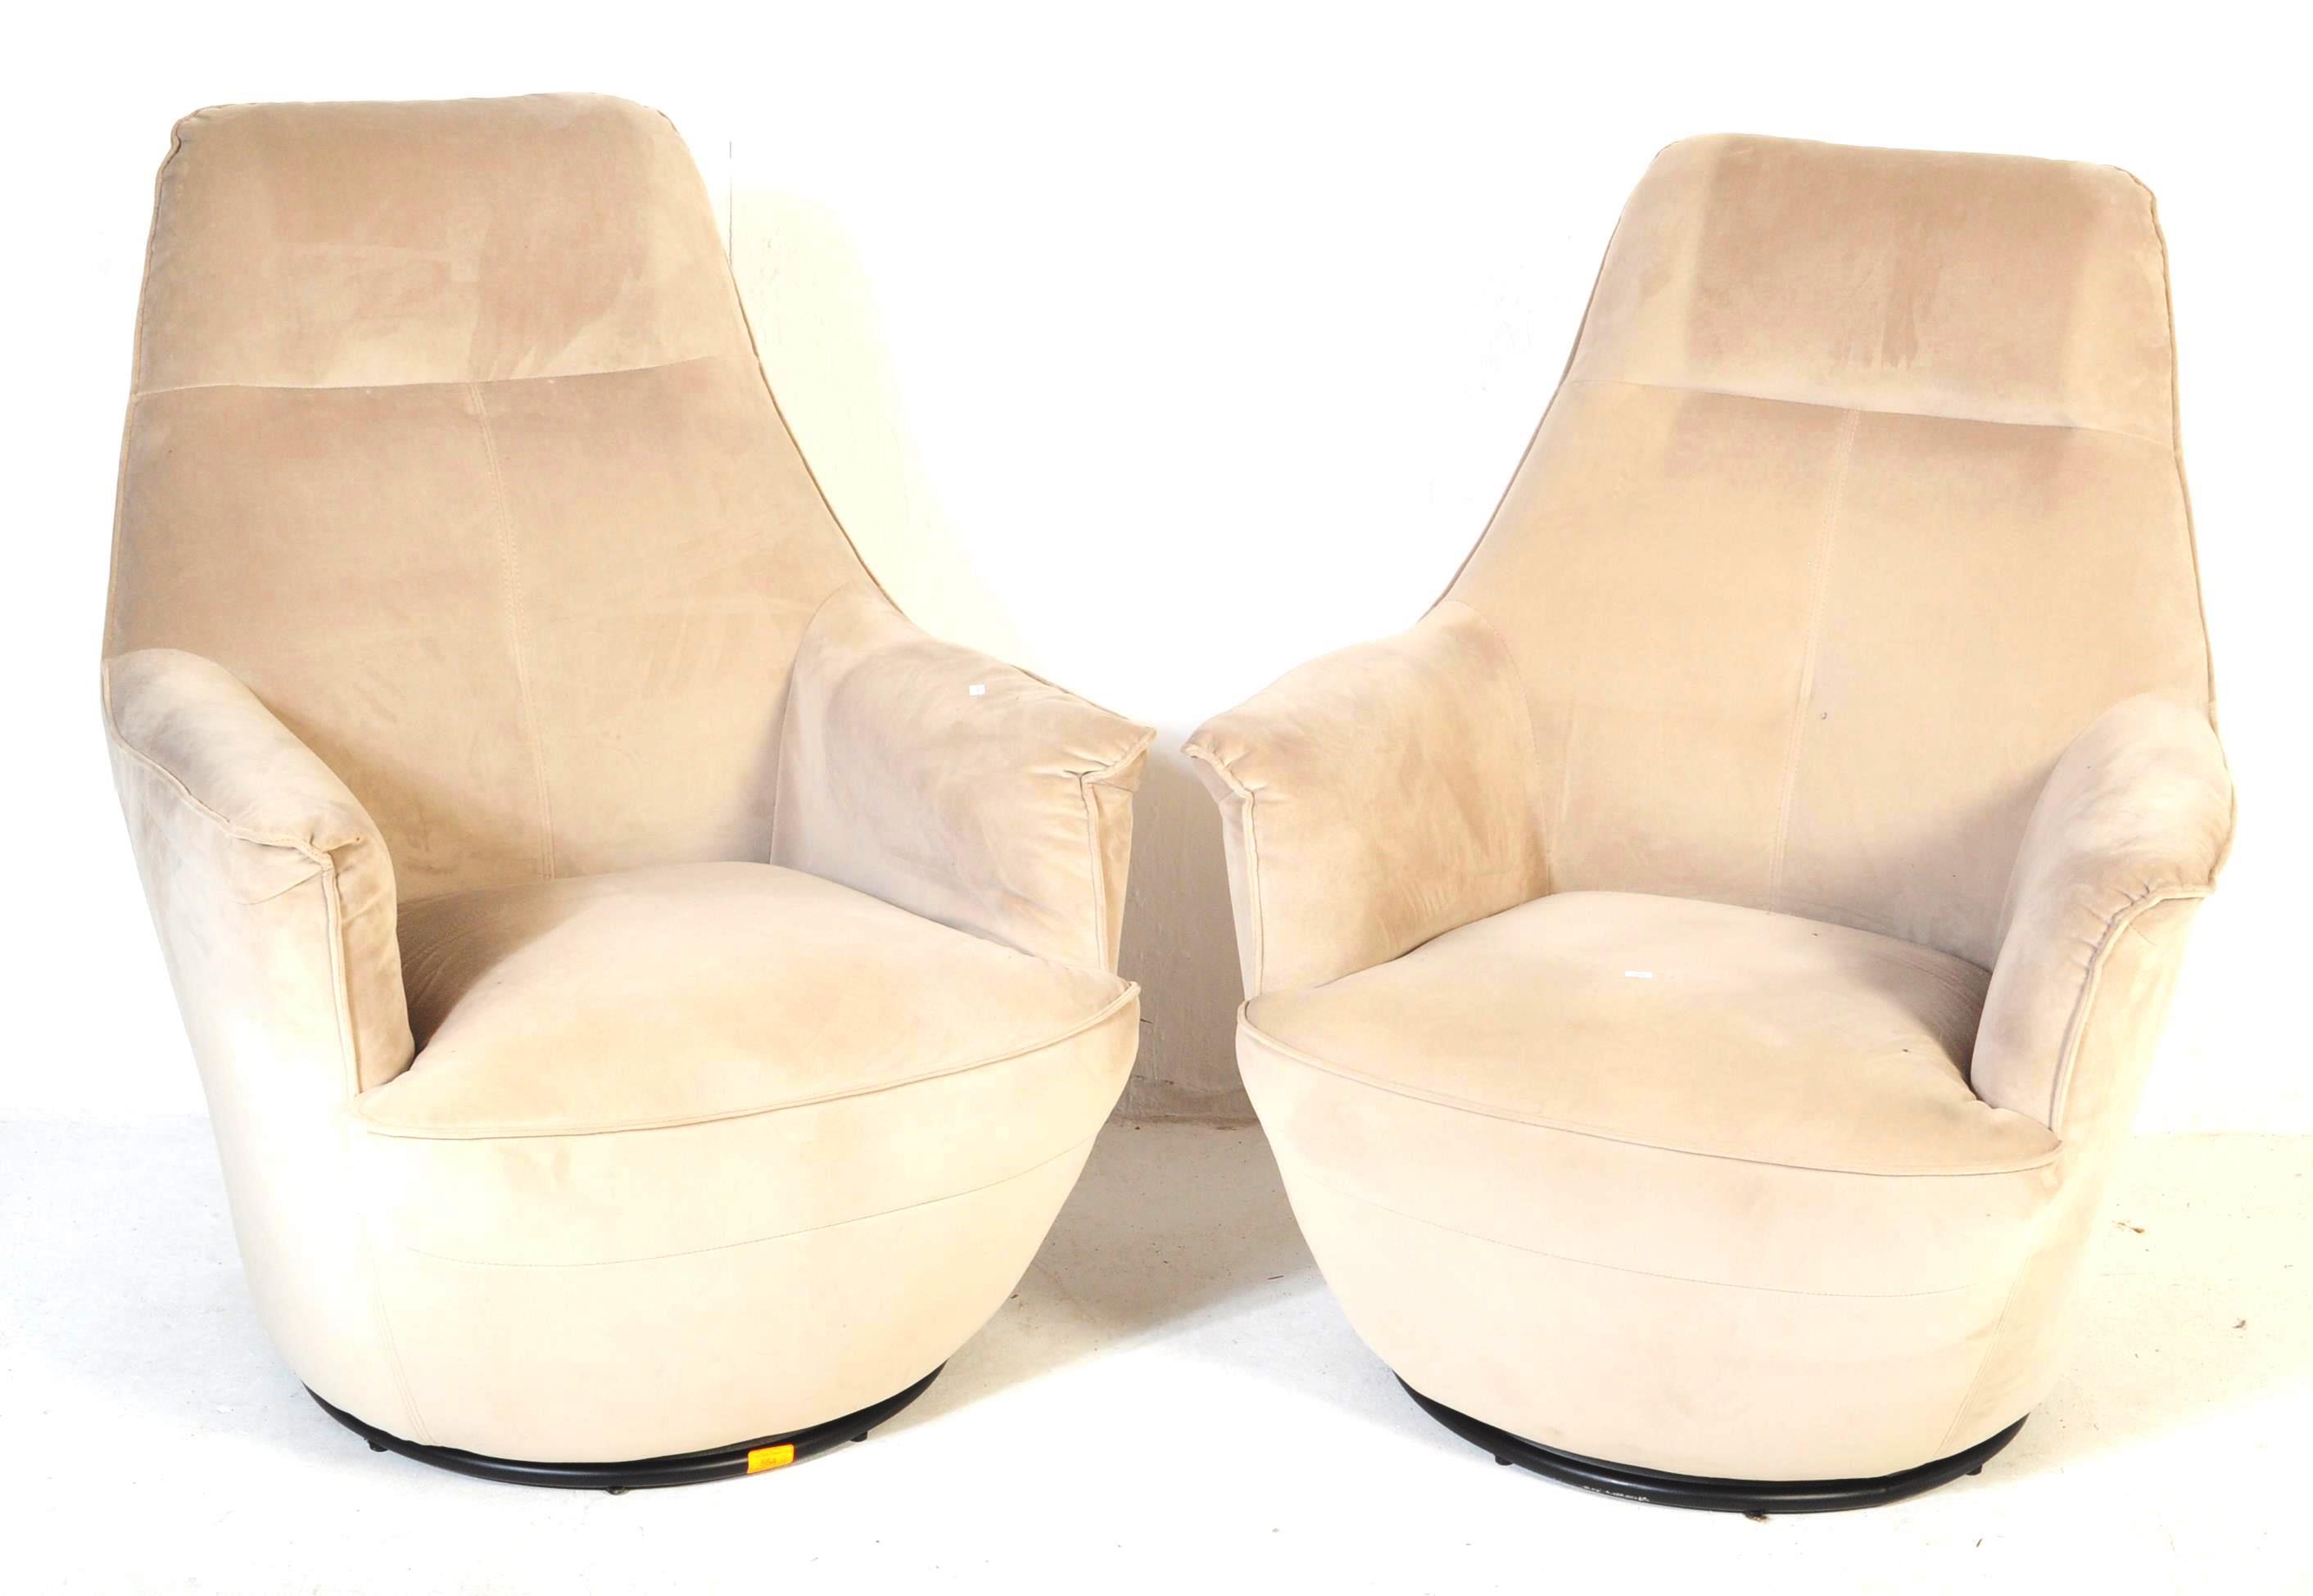 PAIR OF CONTEMPORARY VINTAGE STYLE SWIVEL ARMCHAIRS - Image 2 of 5